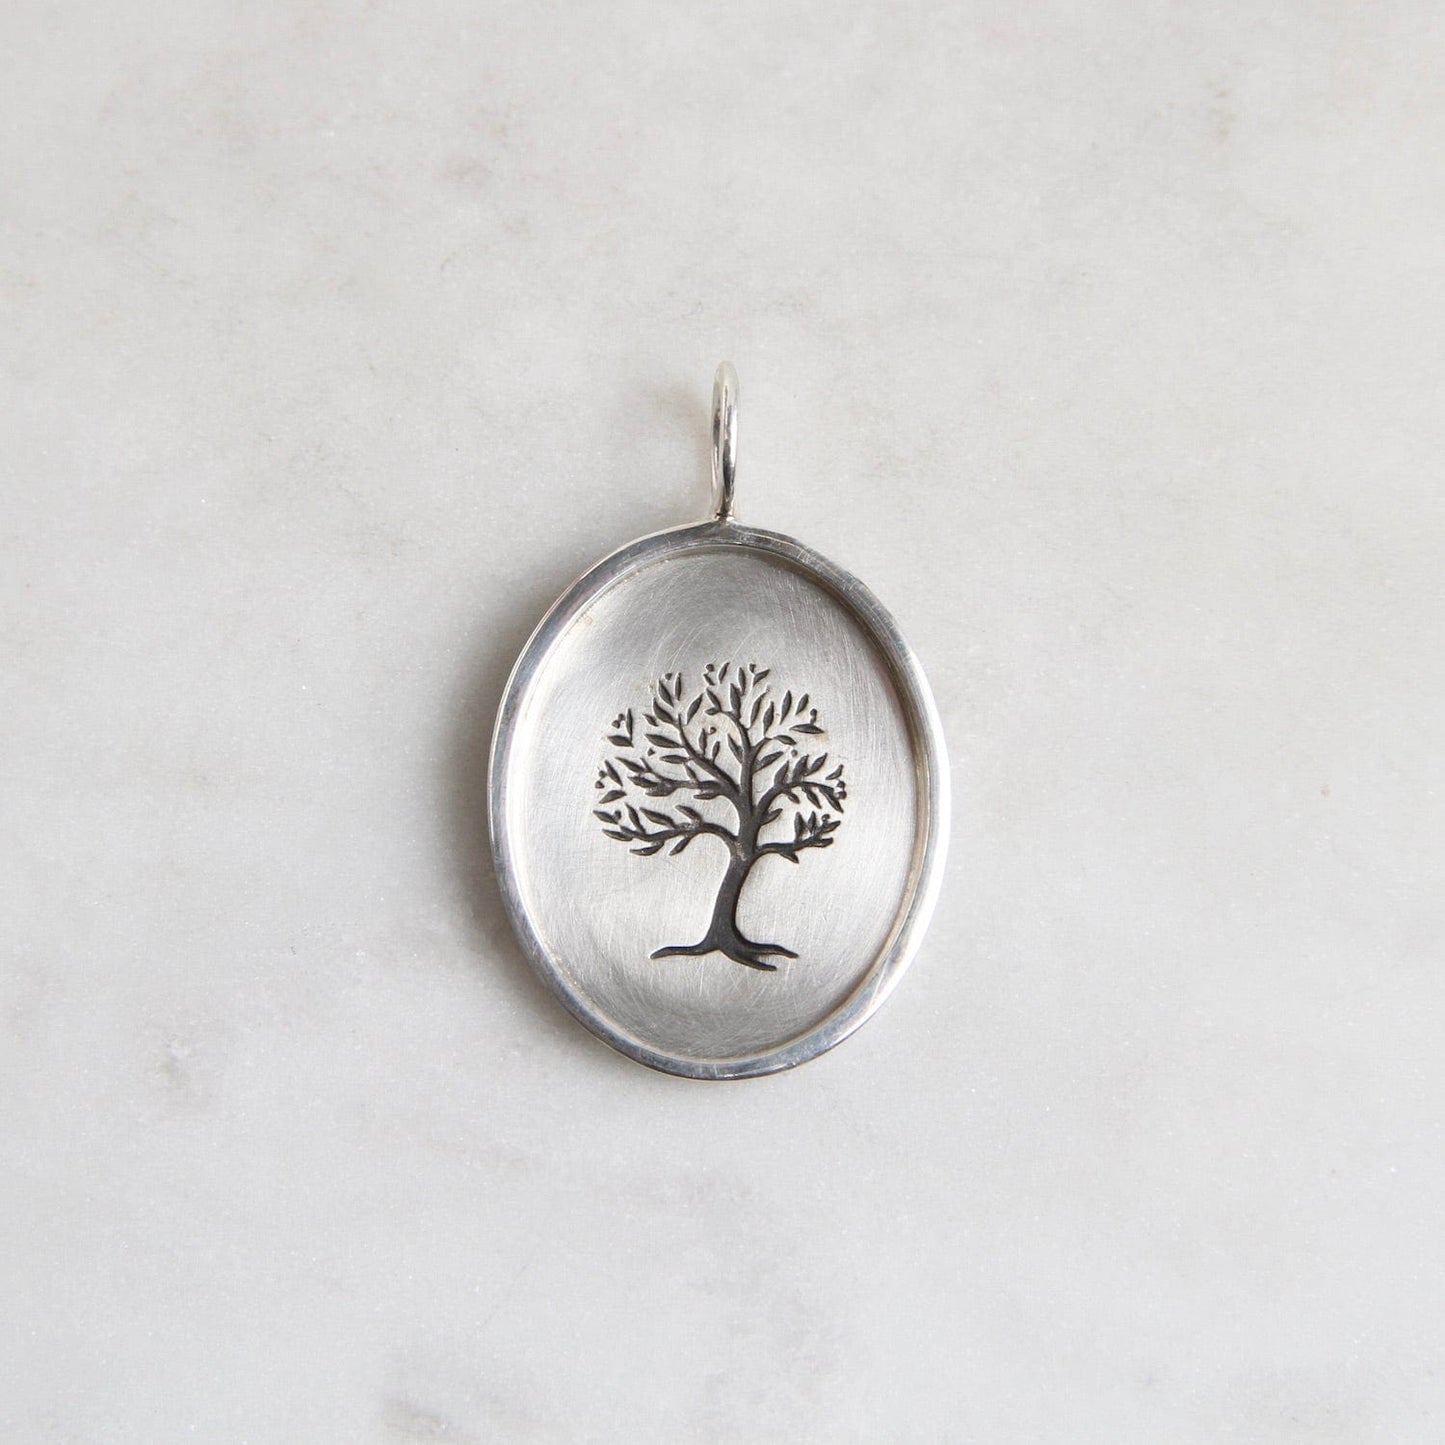 CHM Curved Tree Silver Oval Charm